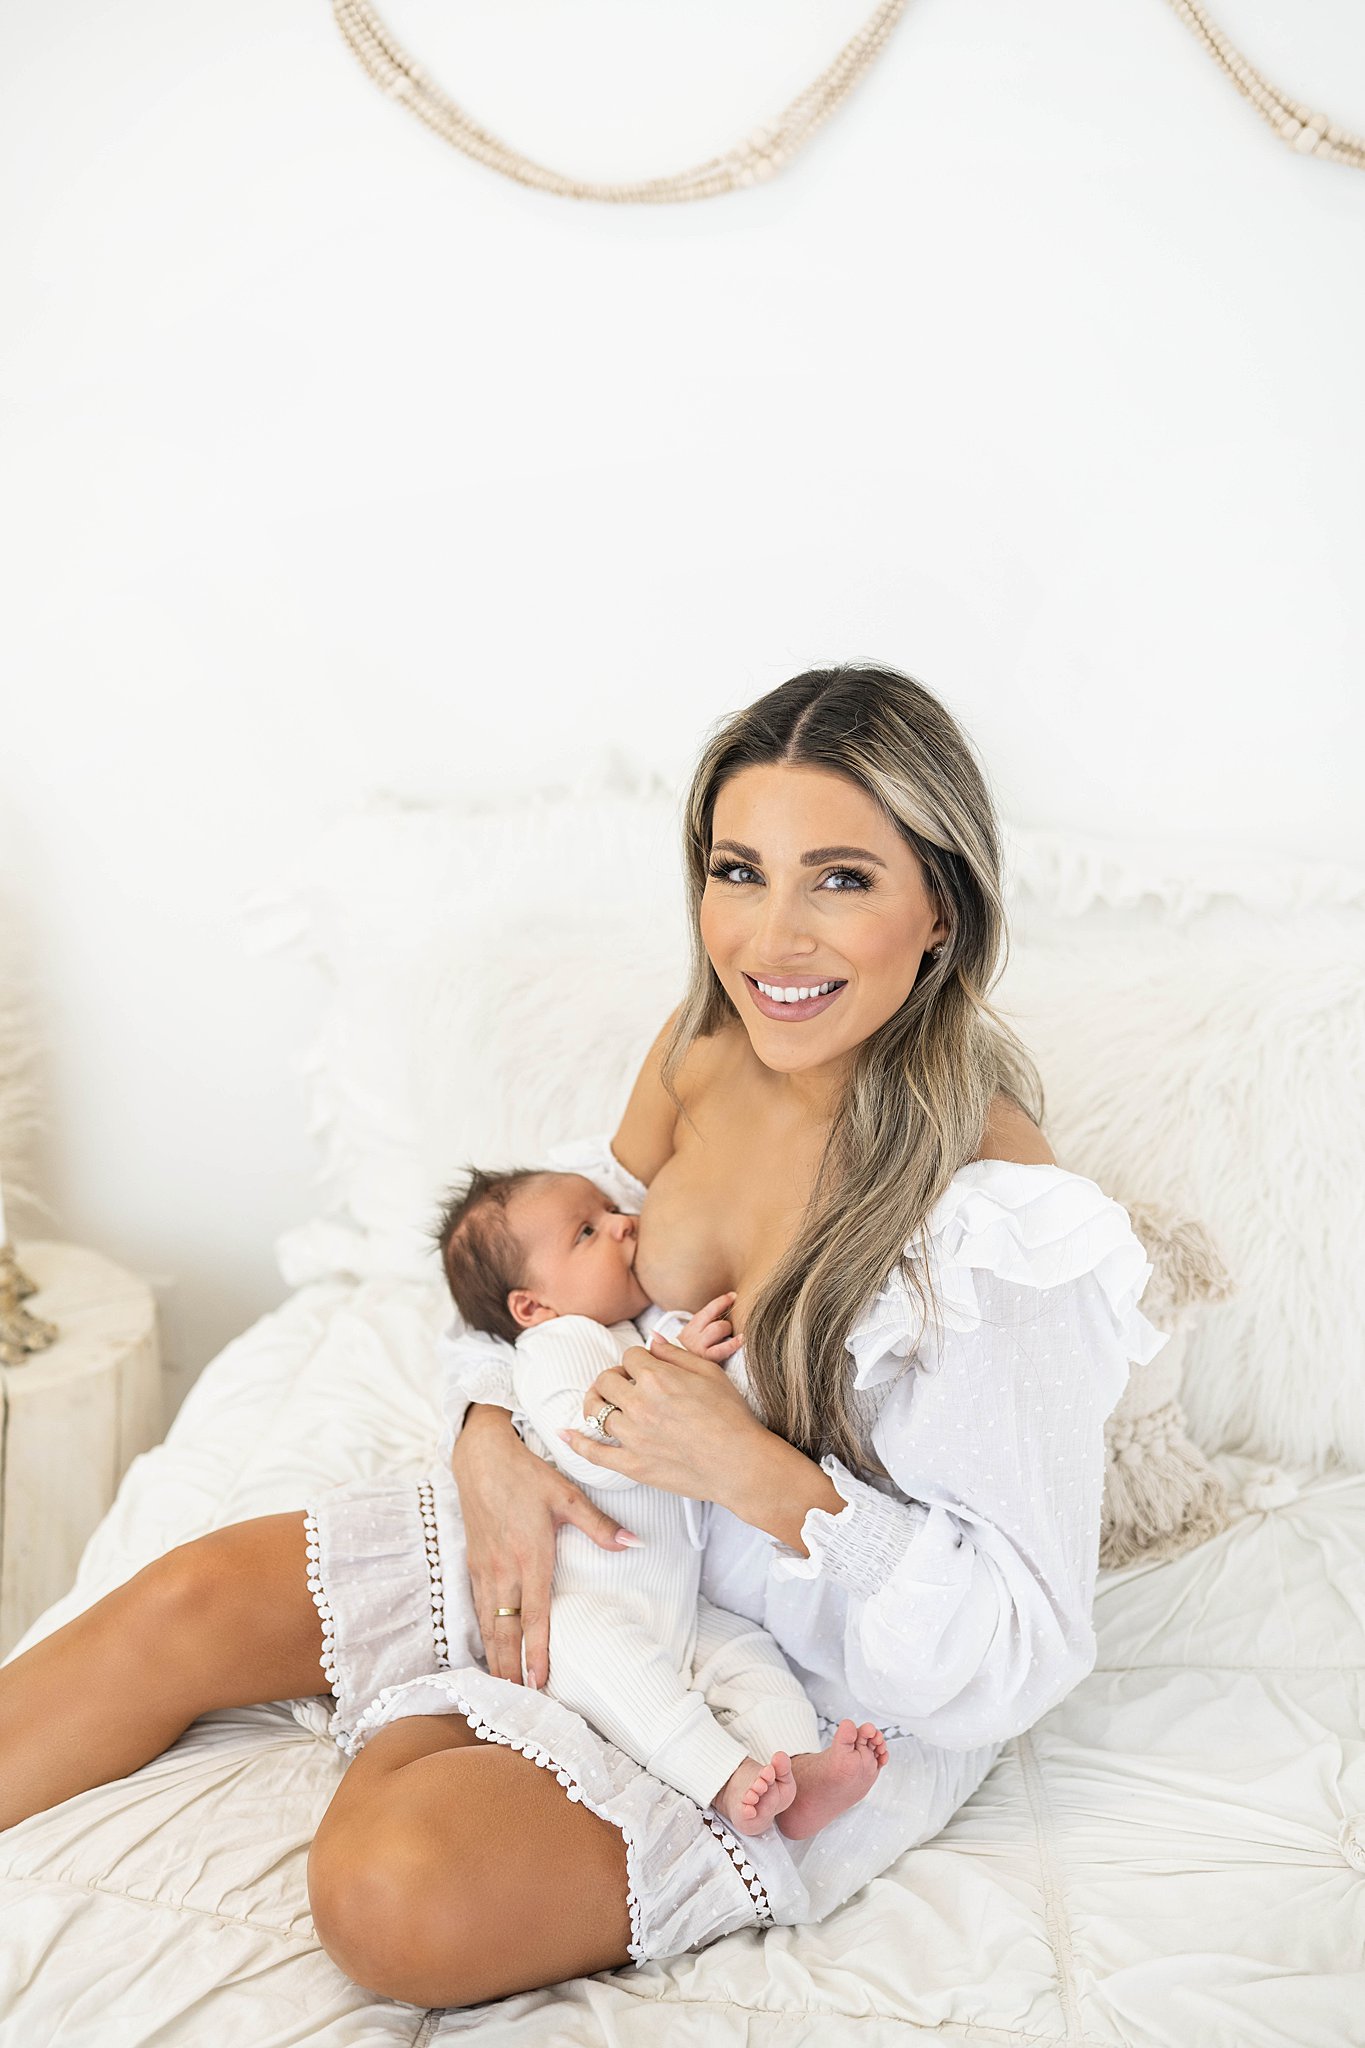 A mother in a white dress sits on a bed while breastfeeding her newborn baby wearing a white onesie Northwest Obstetrics and Gynecology